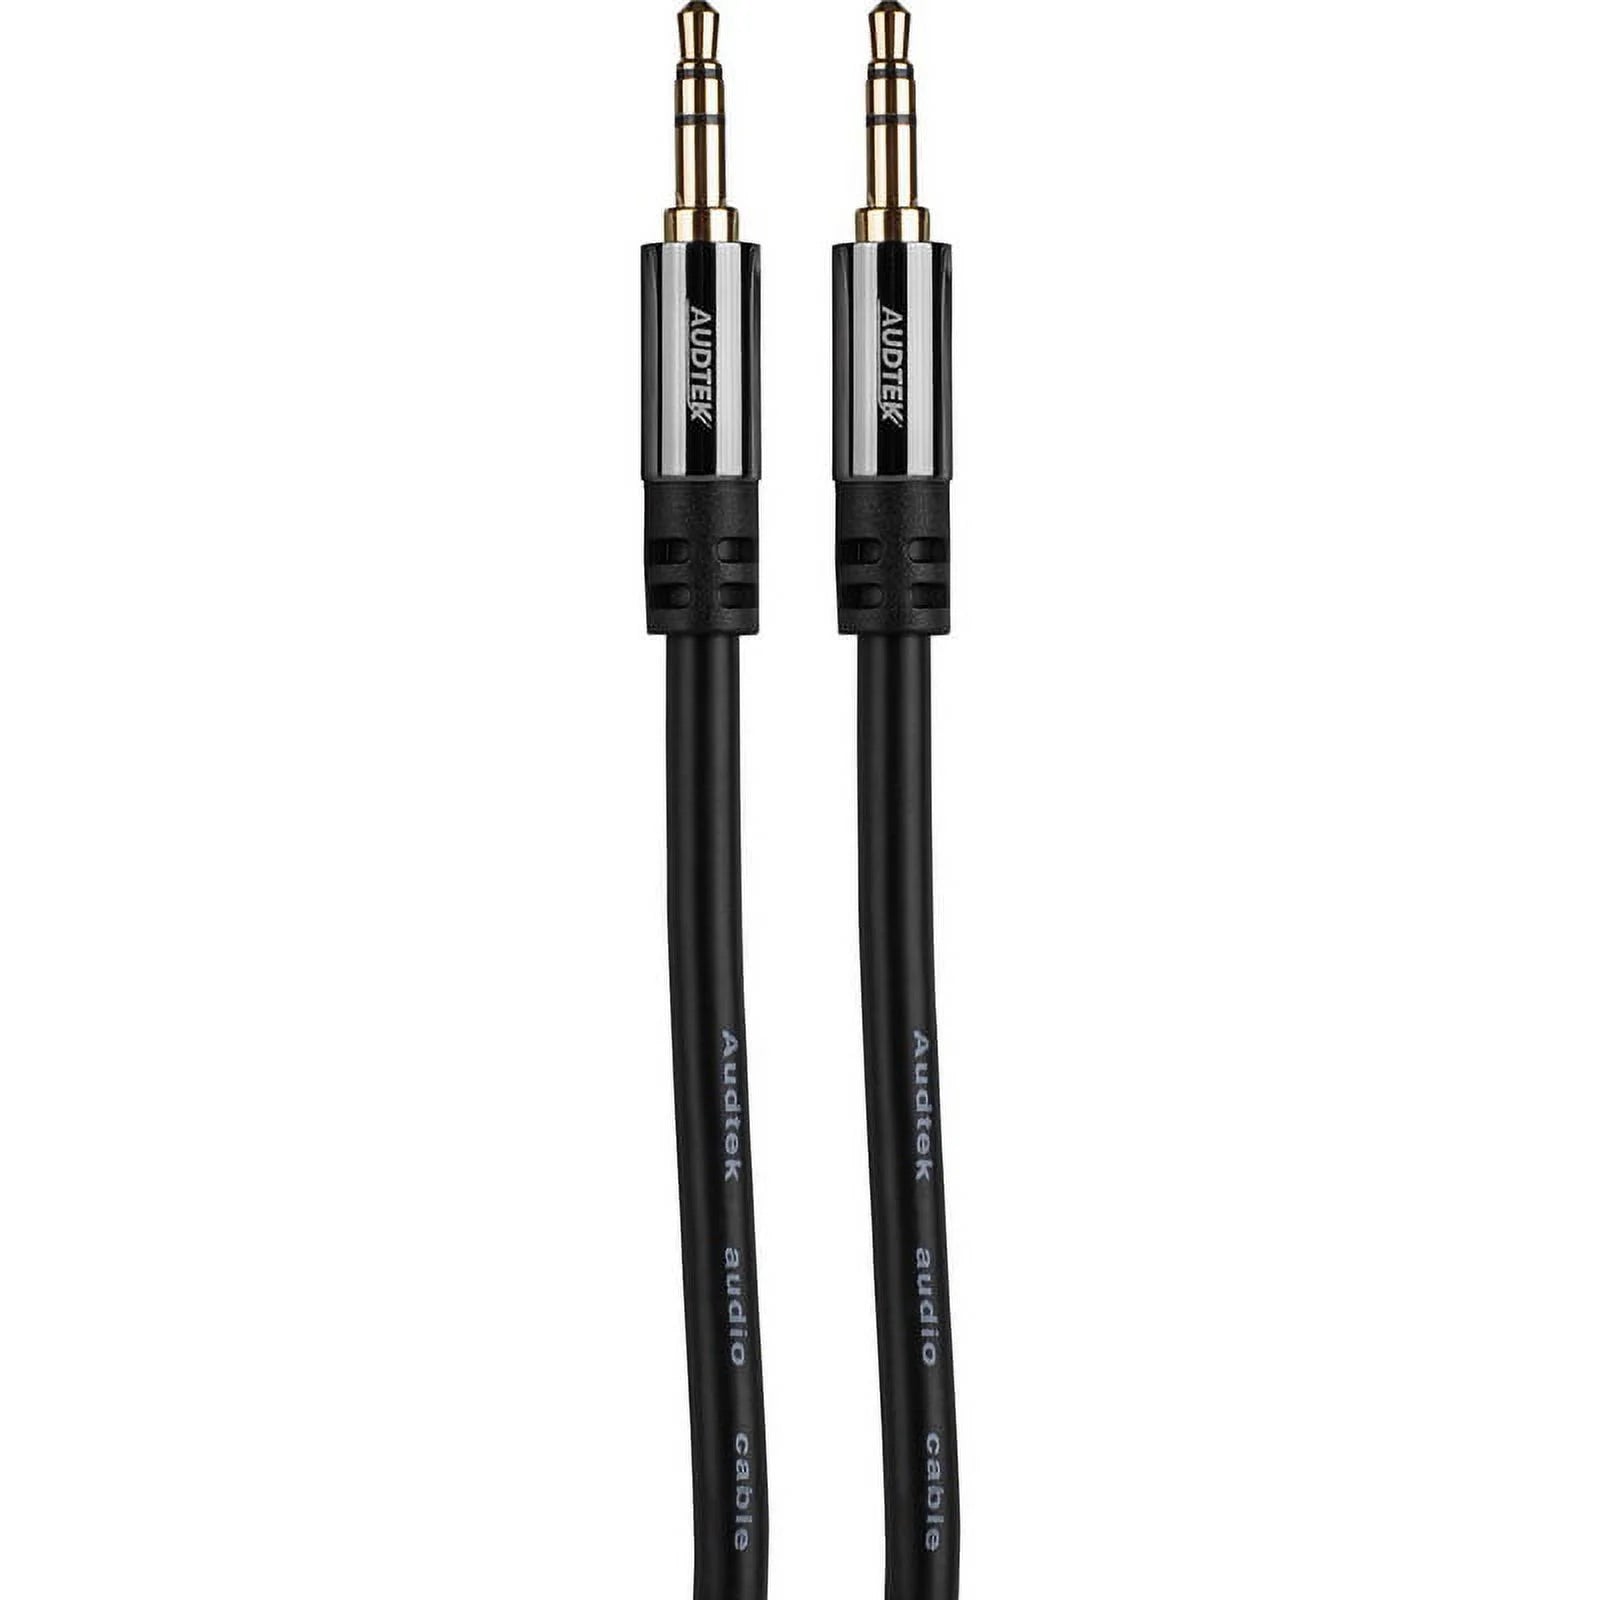 Audtek 3.5mm Stereo Male To Male Premium Dual Shield Cable 6'